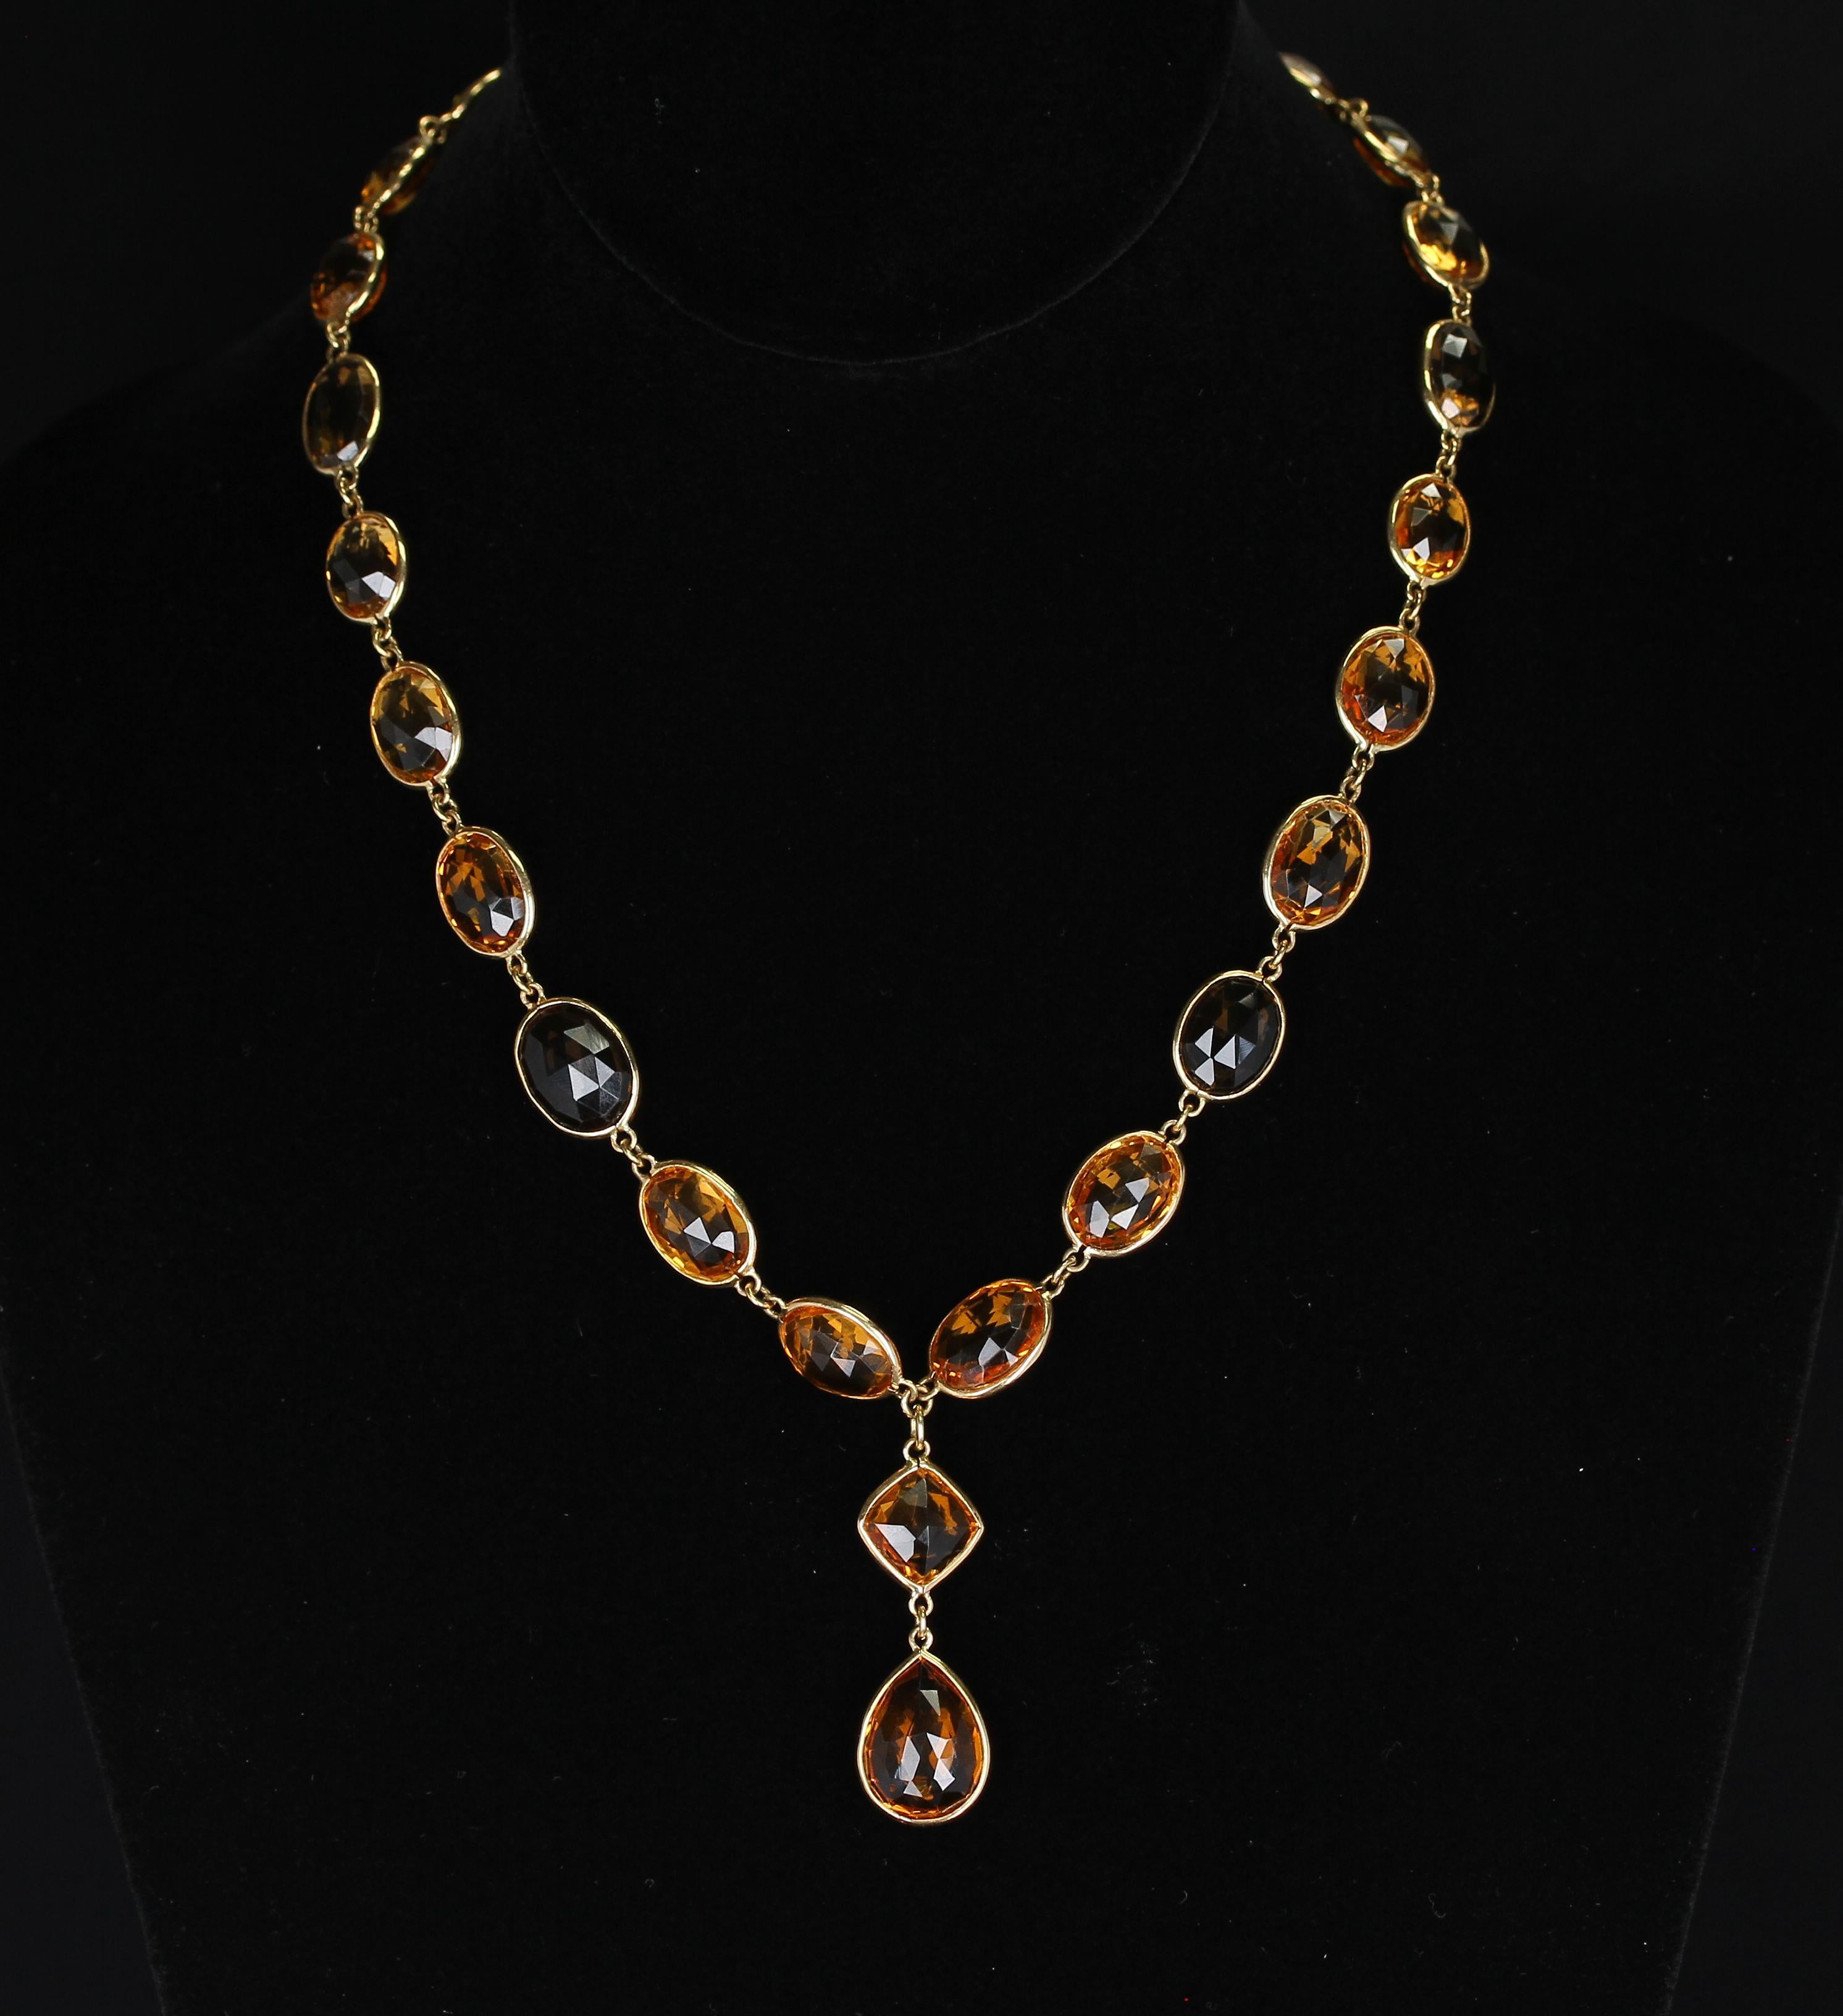 A fine 18K Yellow Gold Necklace with Double Cabochon Rose Cut Citrine and Smoky Quartz. Length: 18